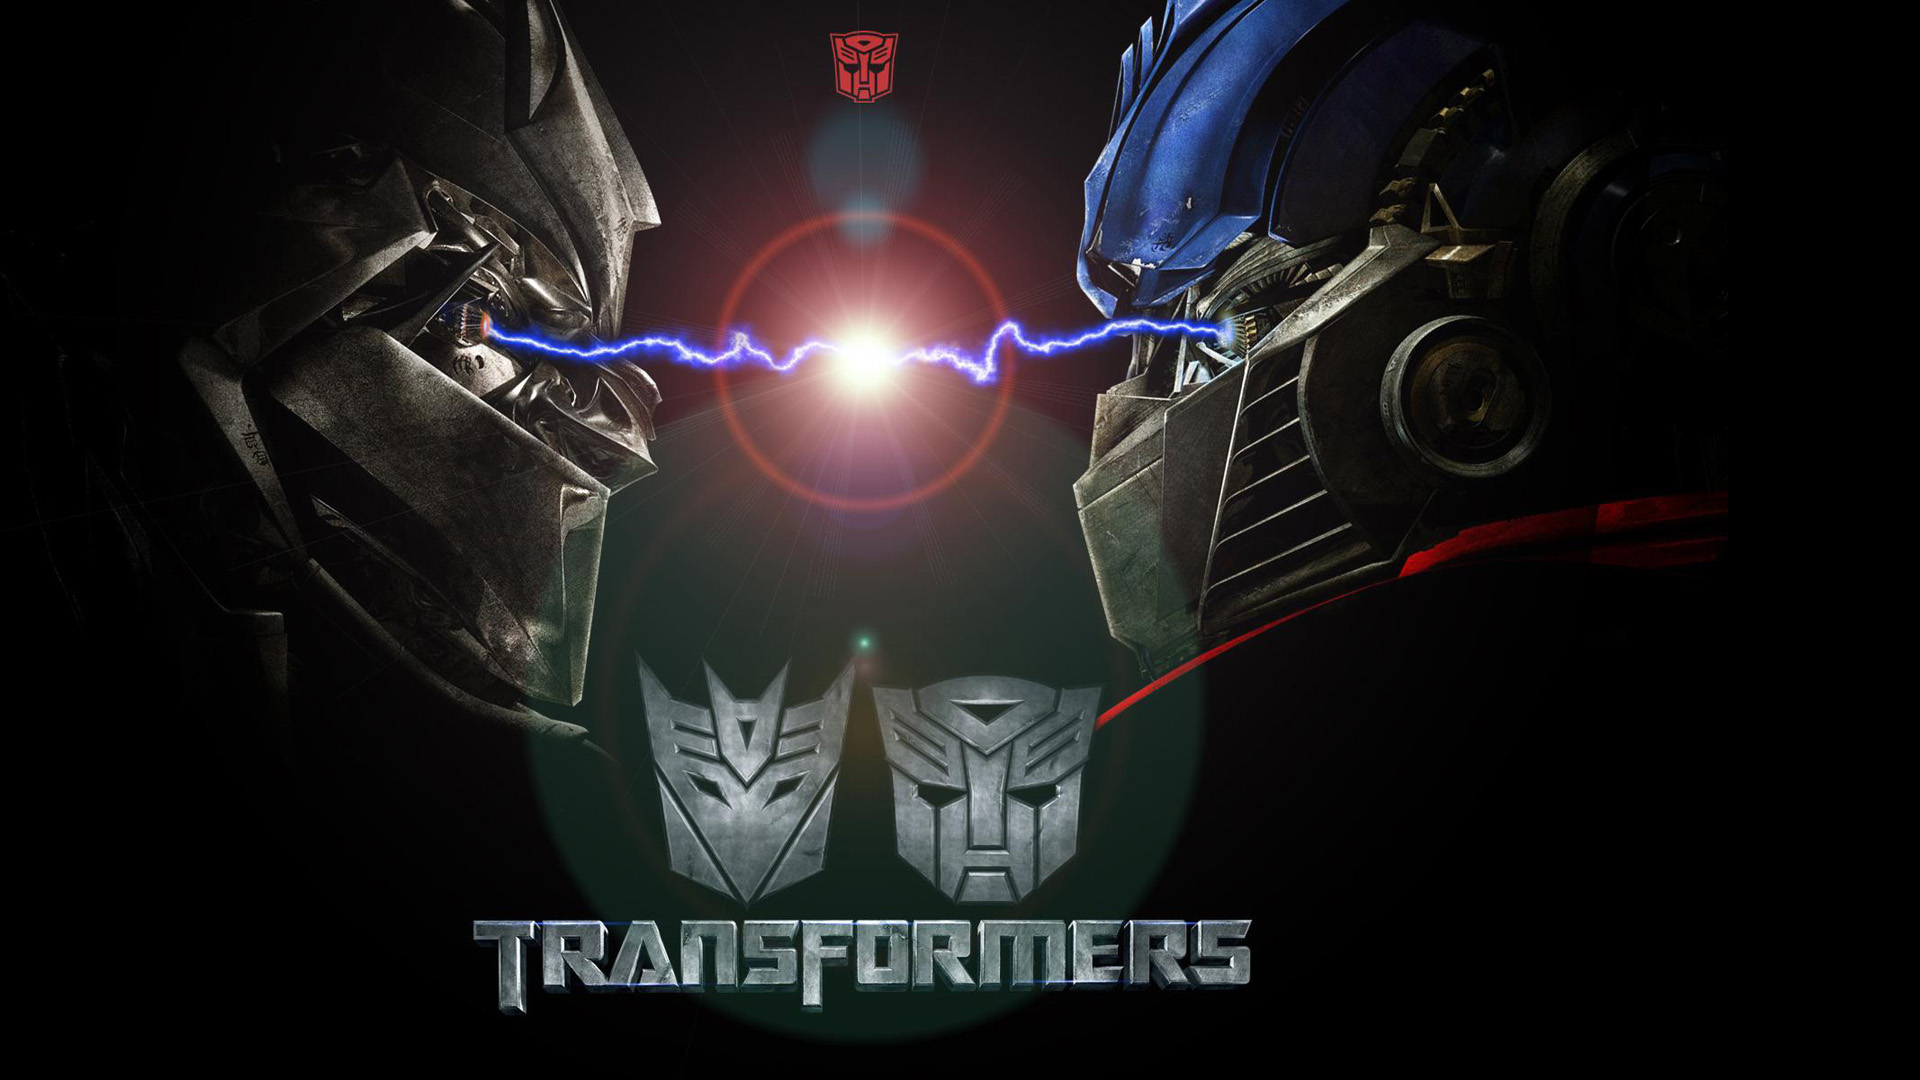  other sizes pixels transformers prime wallpaper collection